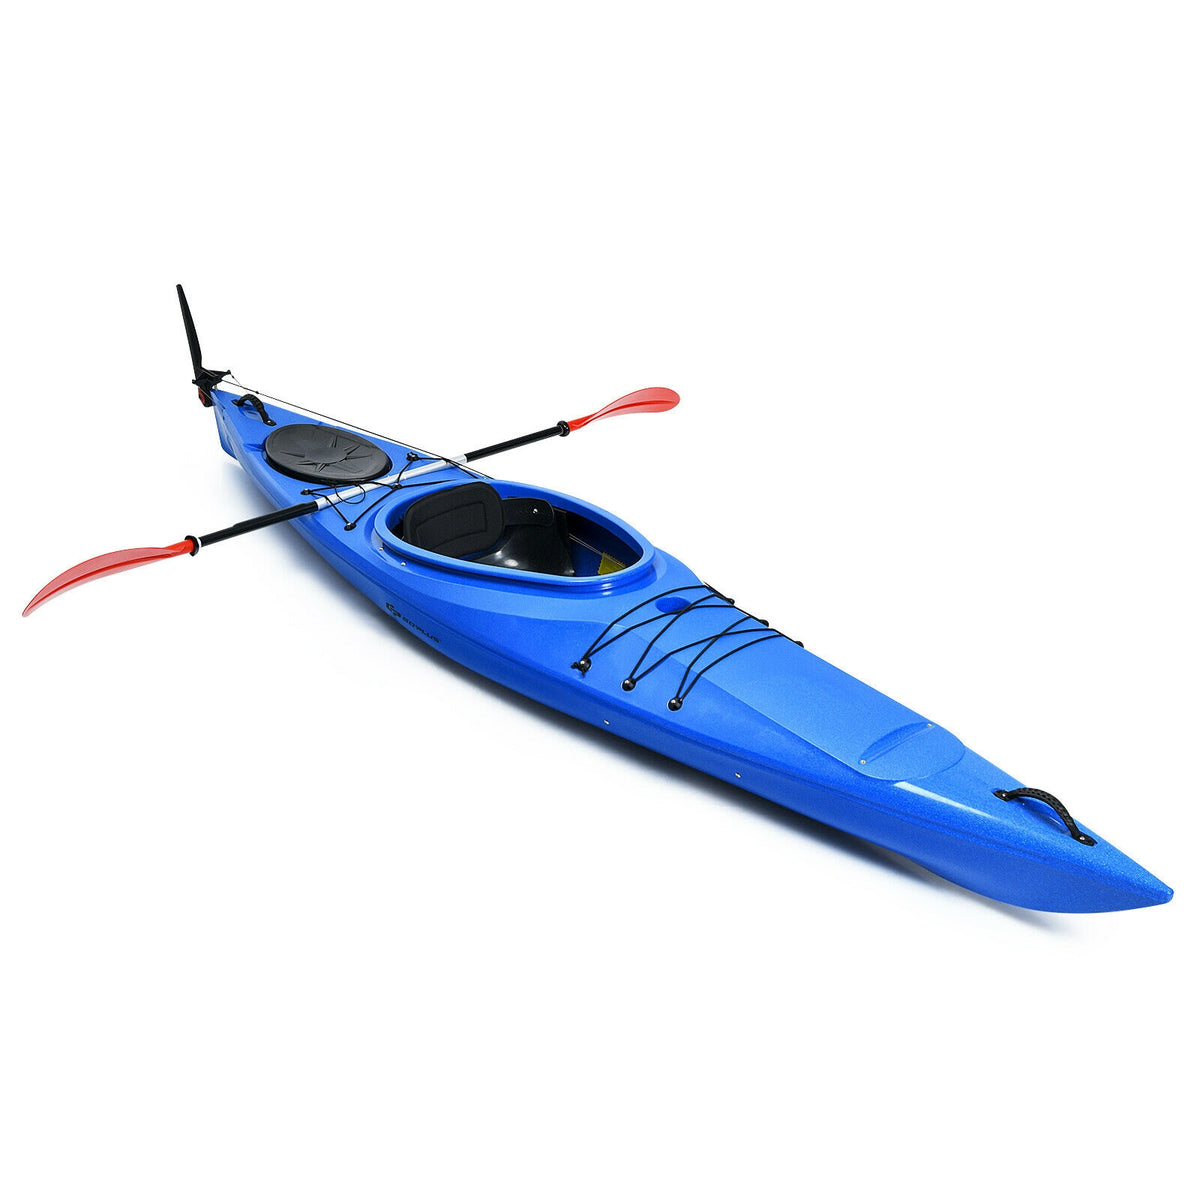 11.9 Ft Single Sit-in Kayak Fishing Kayak Boat with Adjustable Foot Pedal and Detachable Rudder